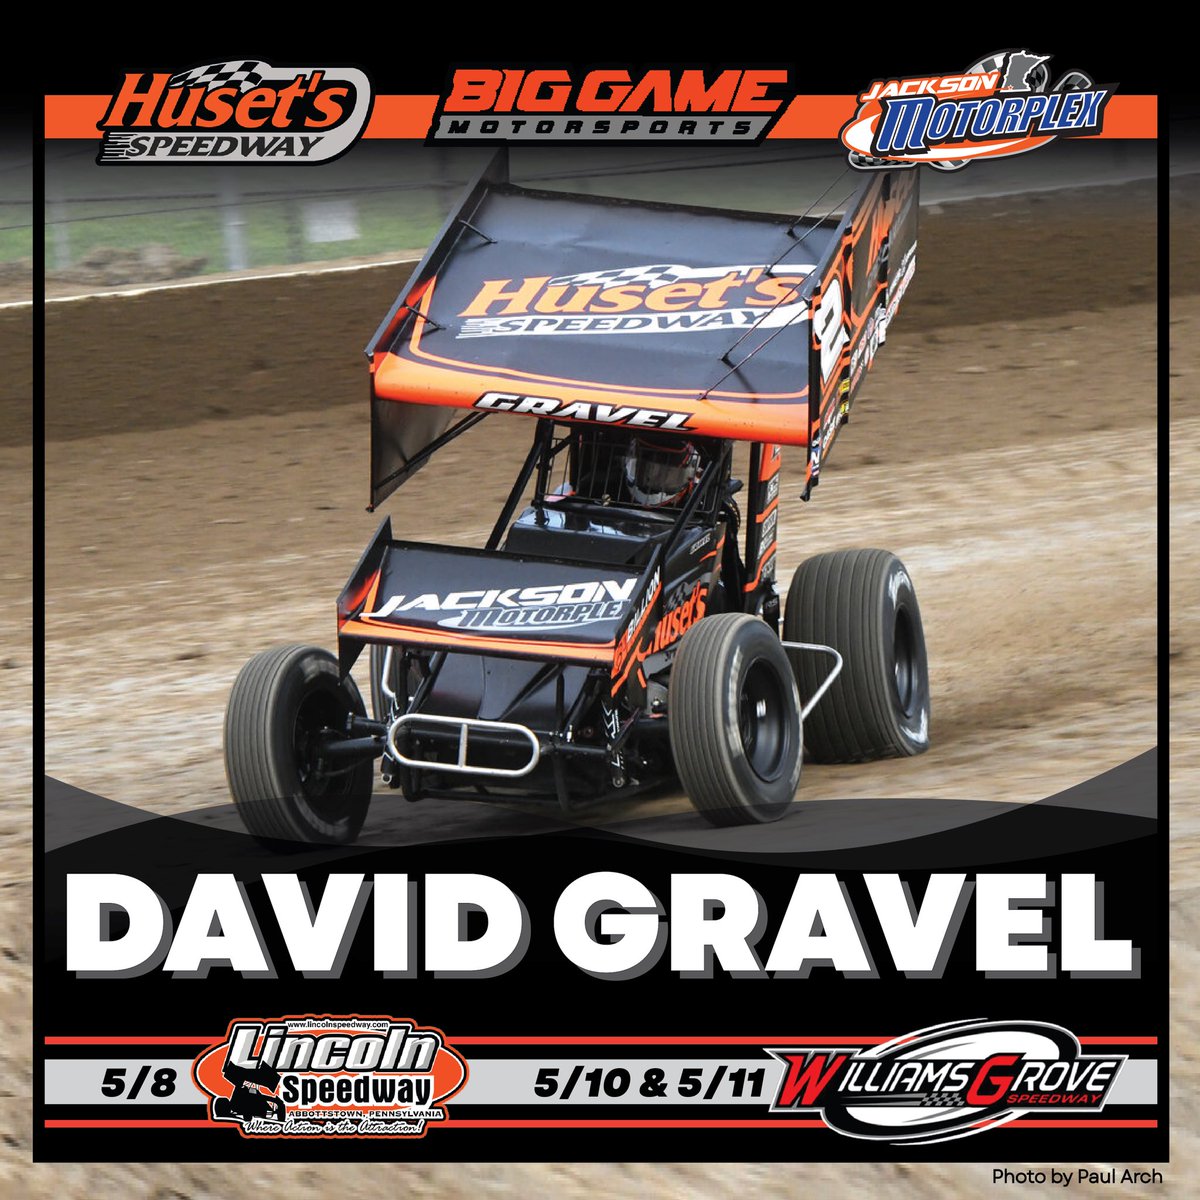 Today kicks off a busy four-day stretch of racing in Central Pennsylvania for @BigGameMotorspt and @DavidGravel! #TeamILP